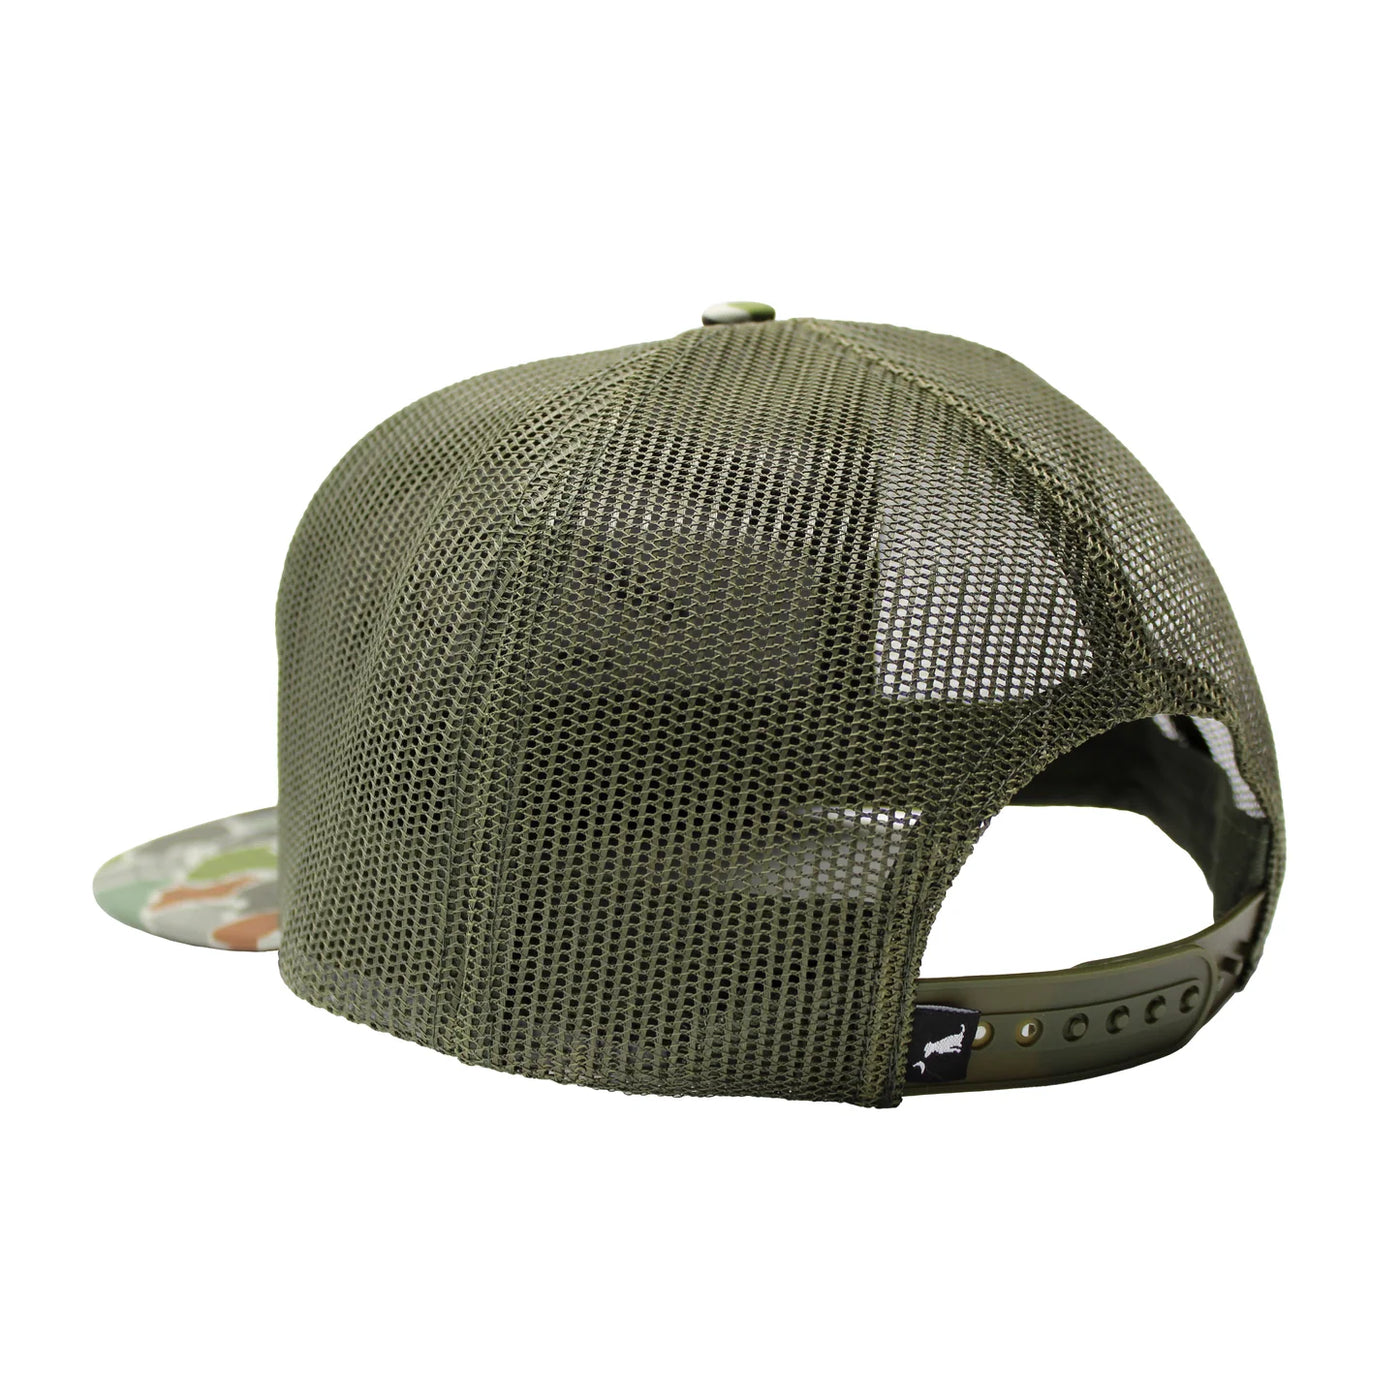 Local Boy Outfitters 7 Panel That Dog'll Hunt Camo Logan